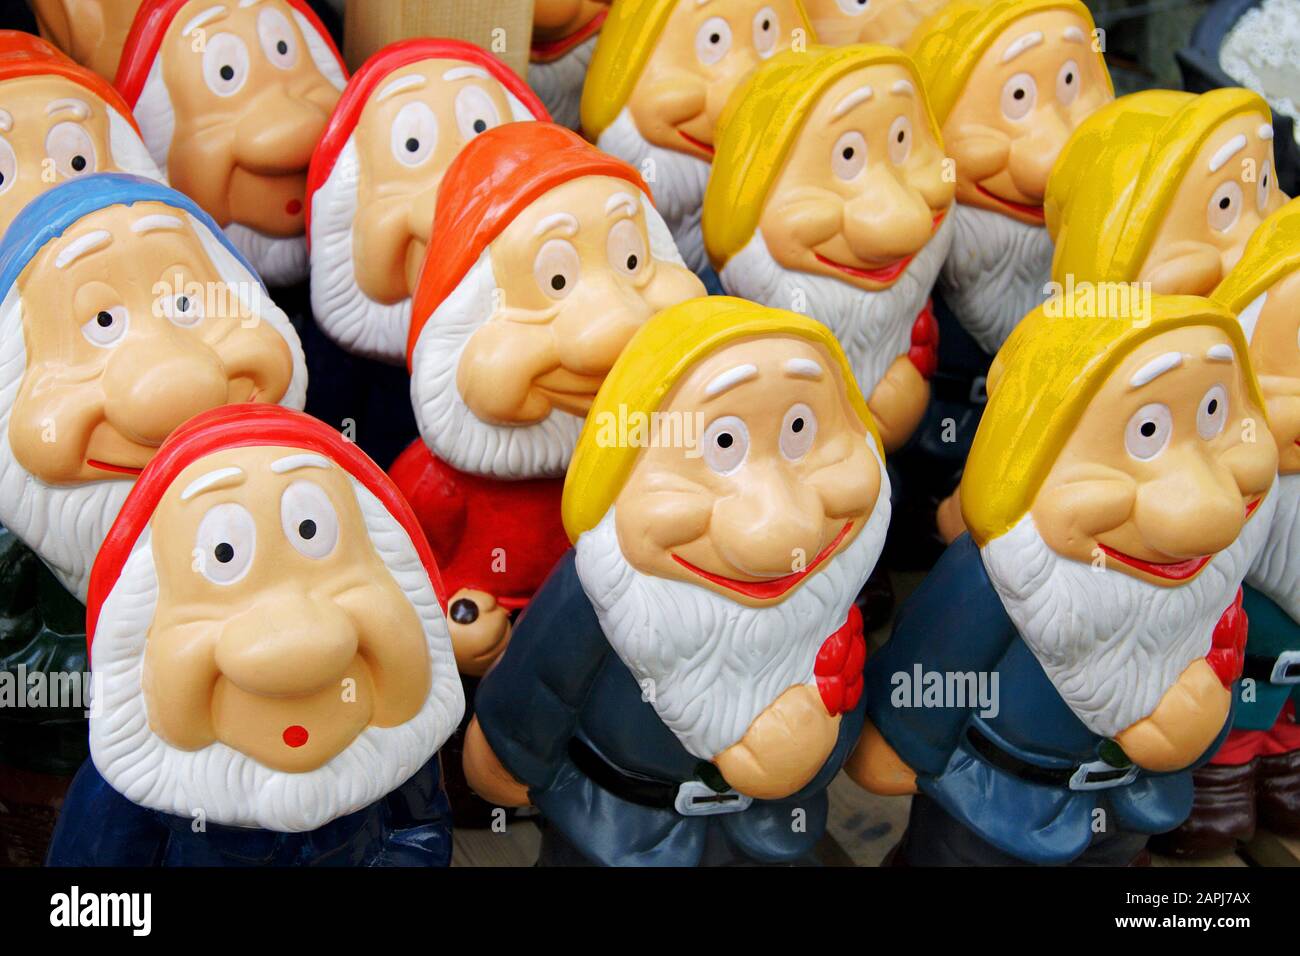 Display of garden gnomes with one with an expression of shock. Stock Photo